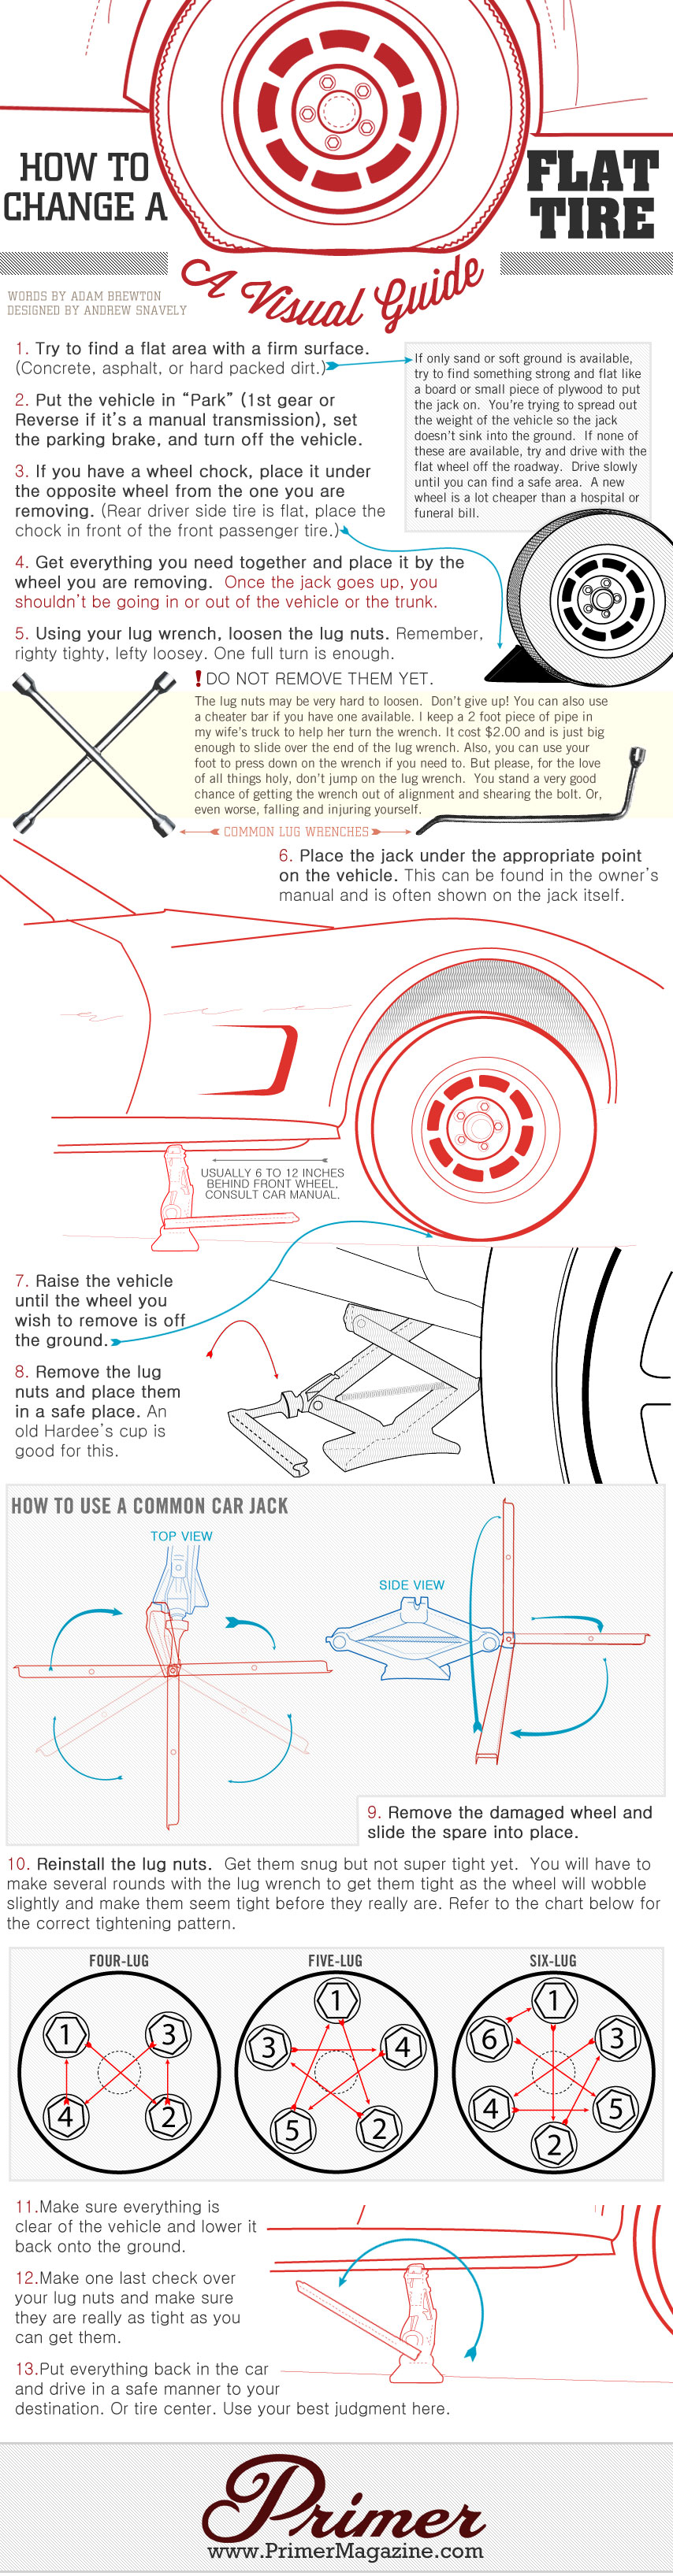 How to Change a Flat Tire Infographic Visual Guide